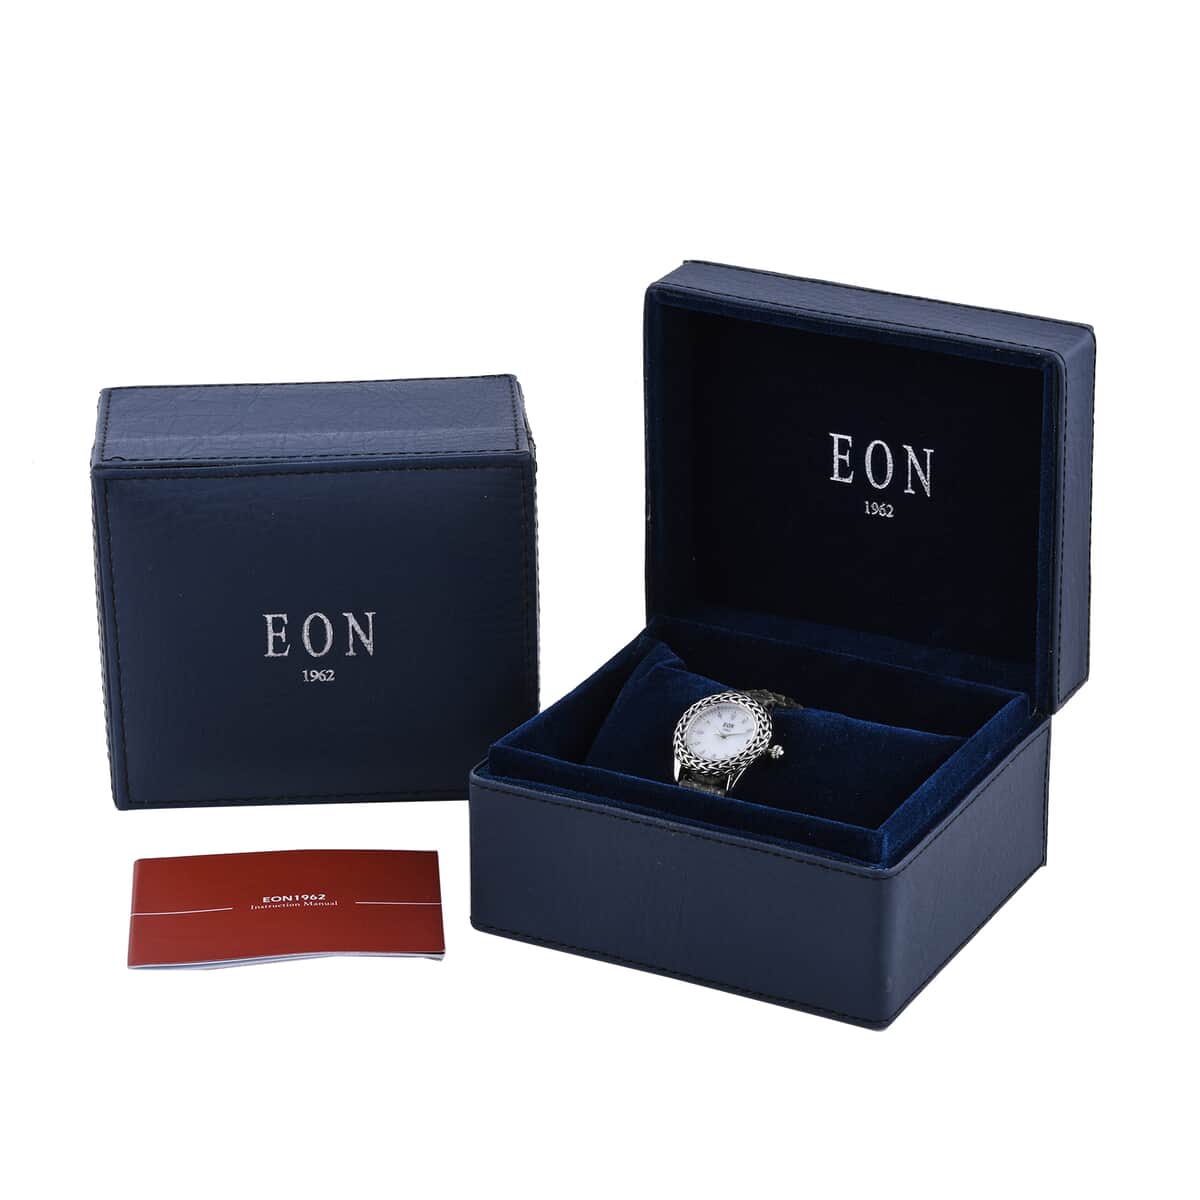 EON 1962 Swiss Movement Watch with Black and Grey Python Leather Band image number 6